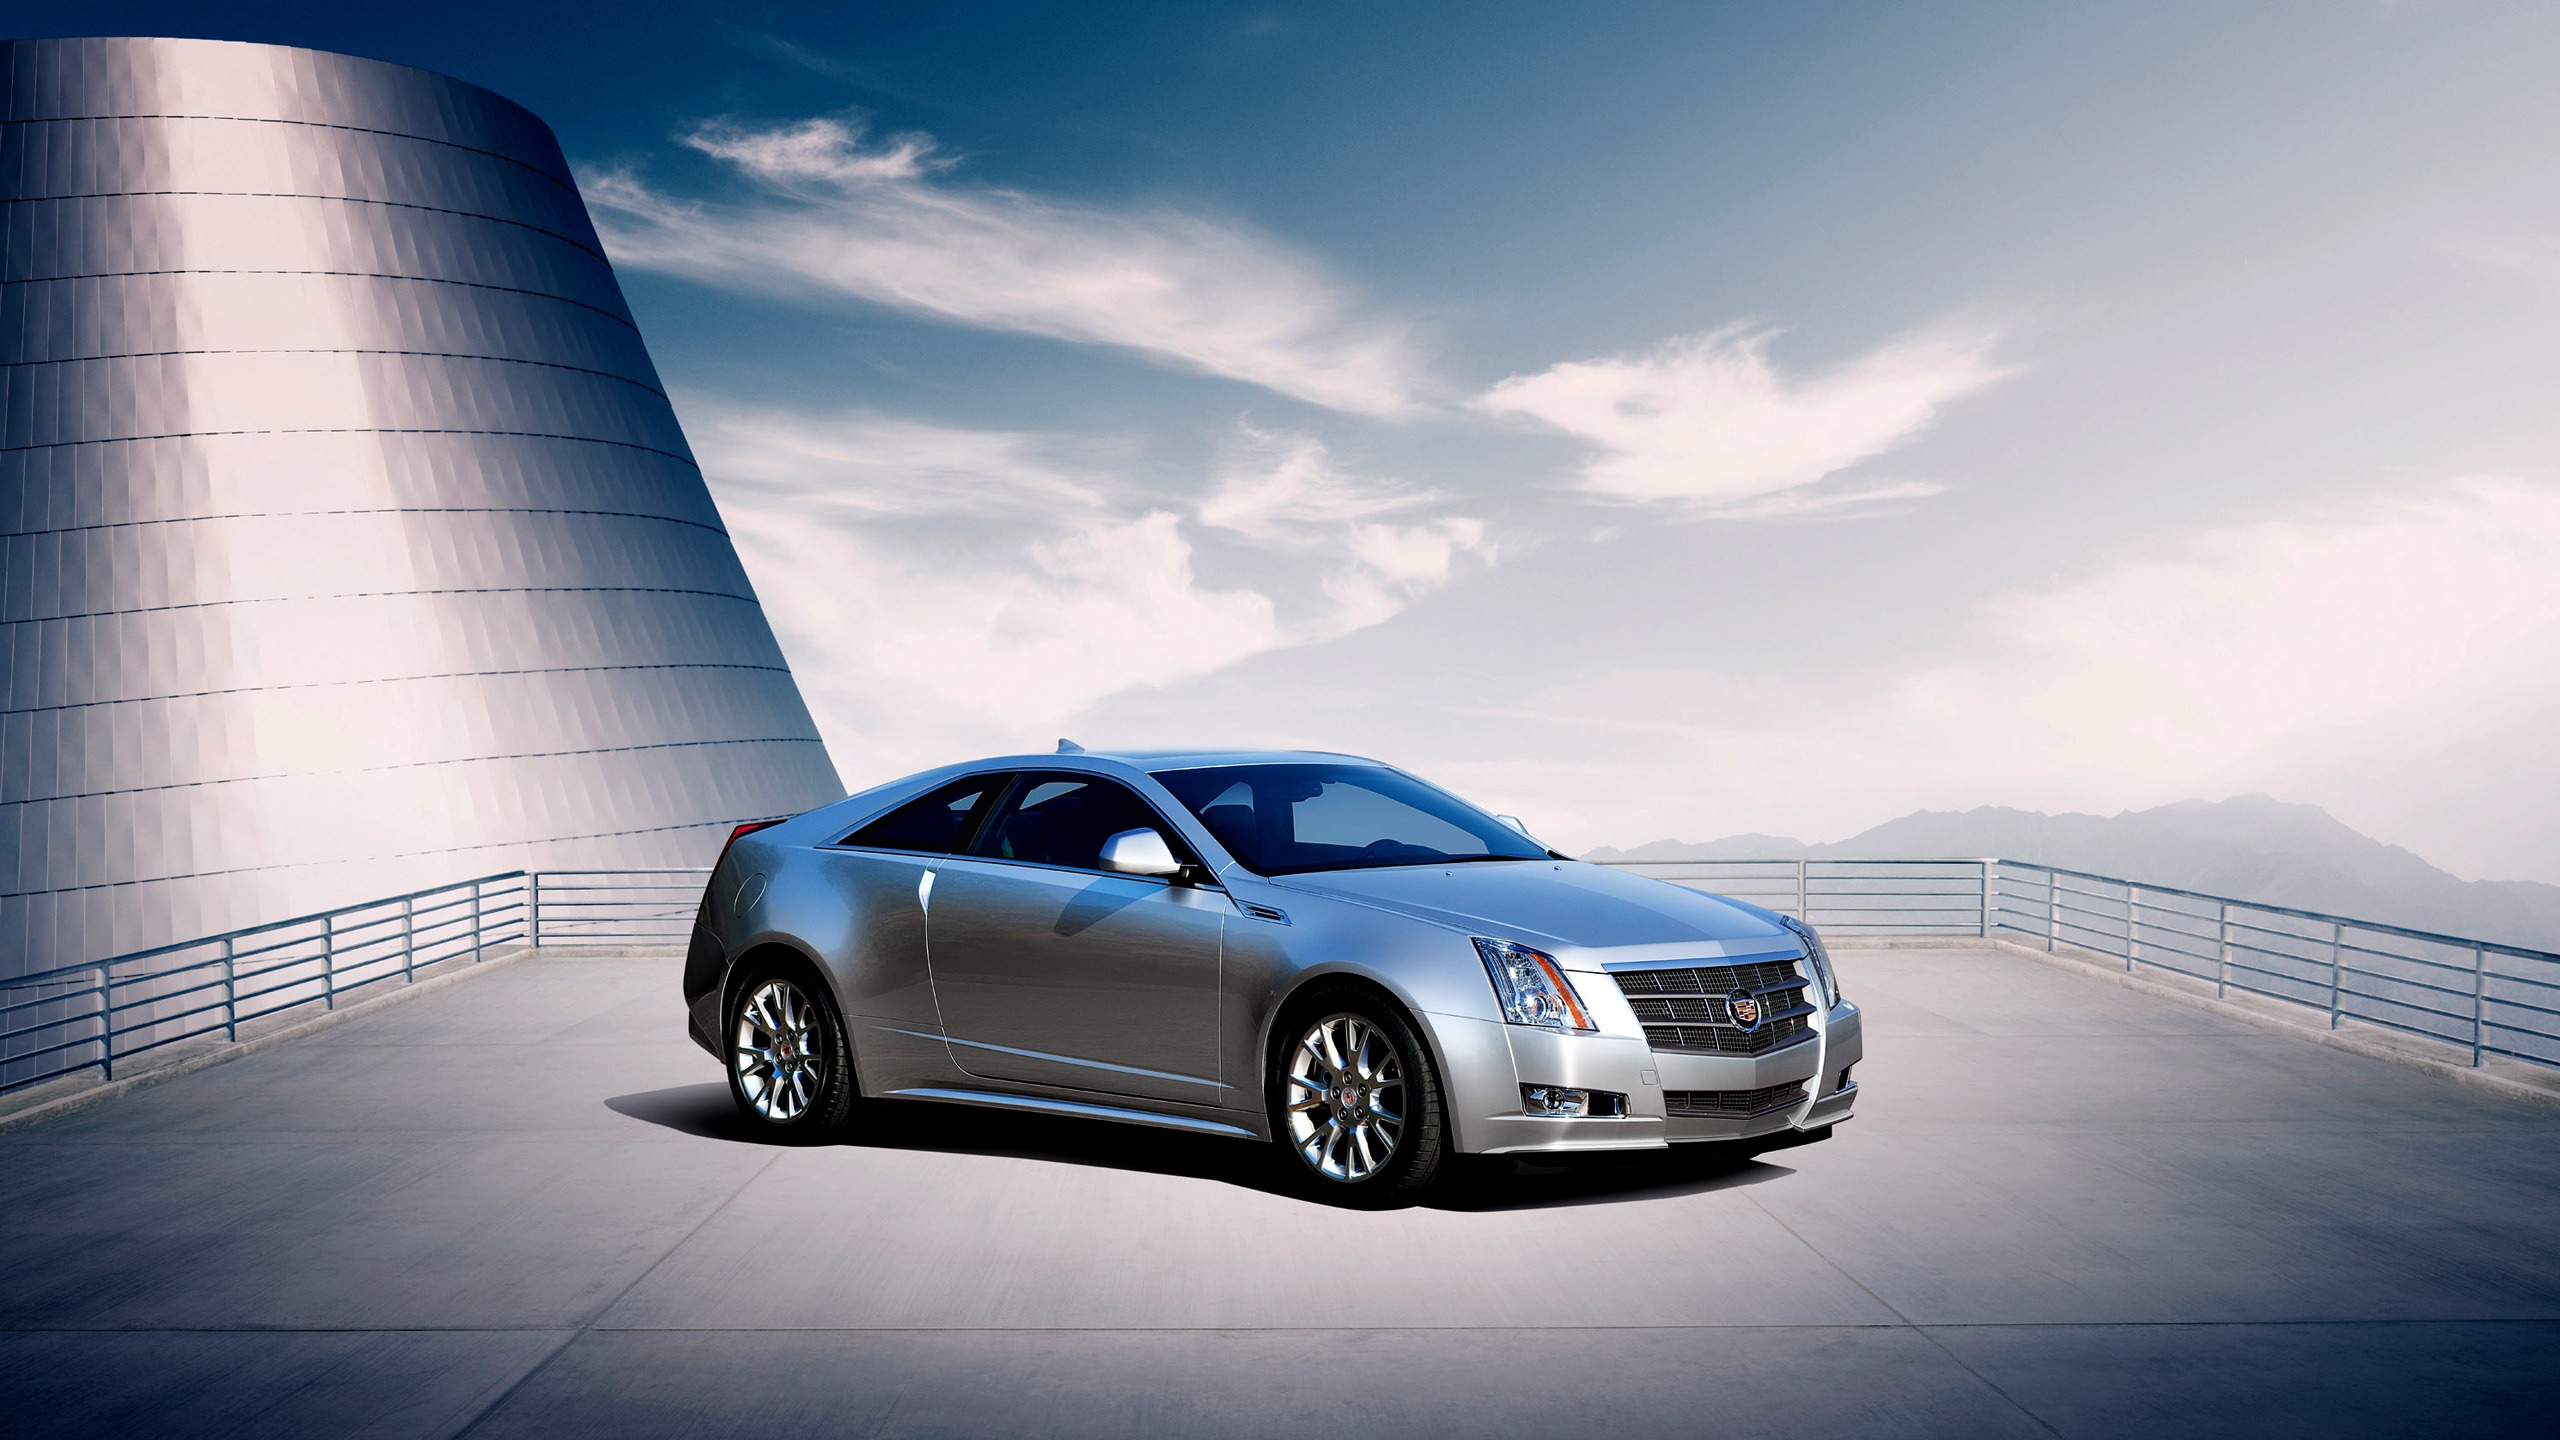 2011 Cadillac CTS Coupe for 2560x1440 HDTV resolution